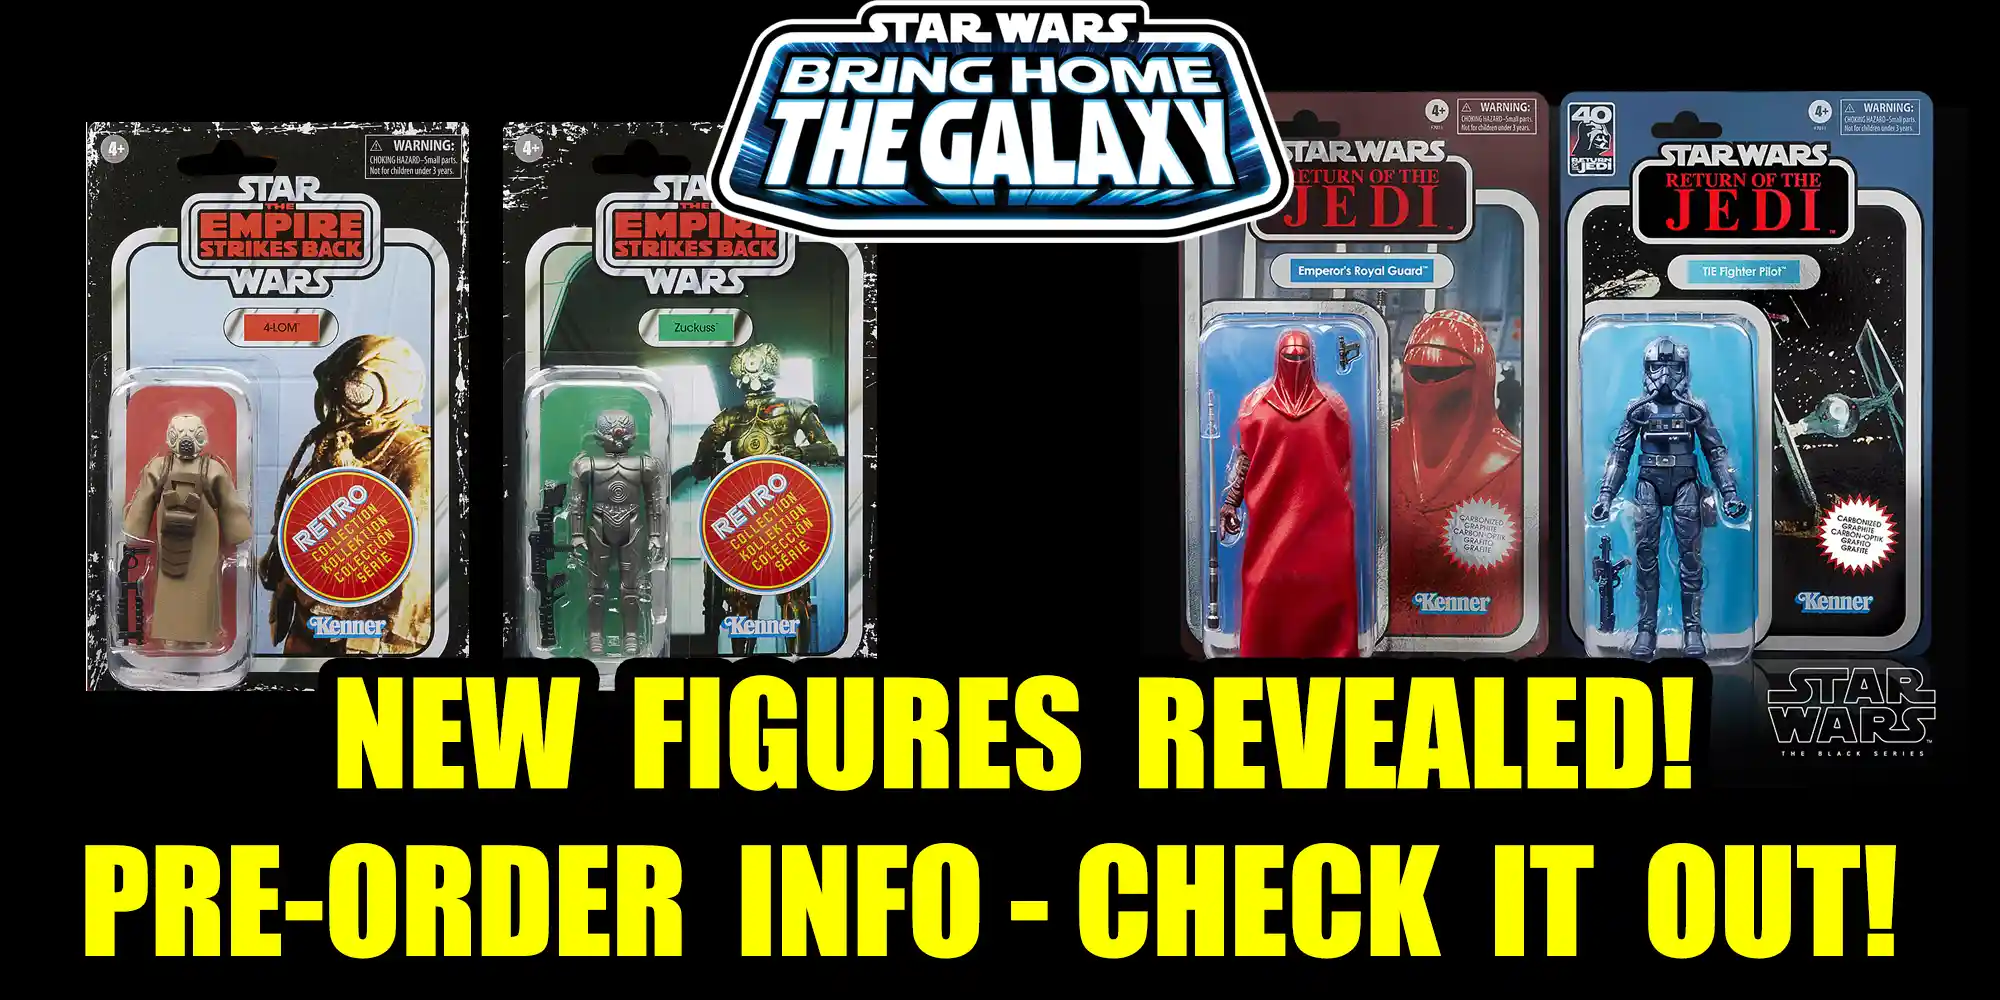 Pre-Order Links And Details For Today's Reveals! Check It Out!